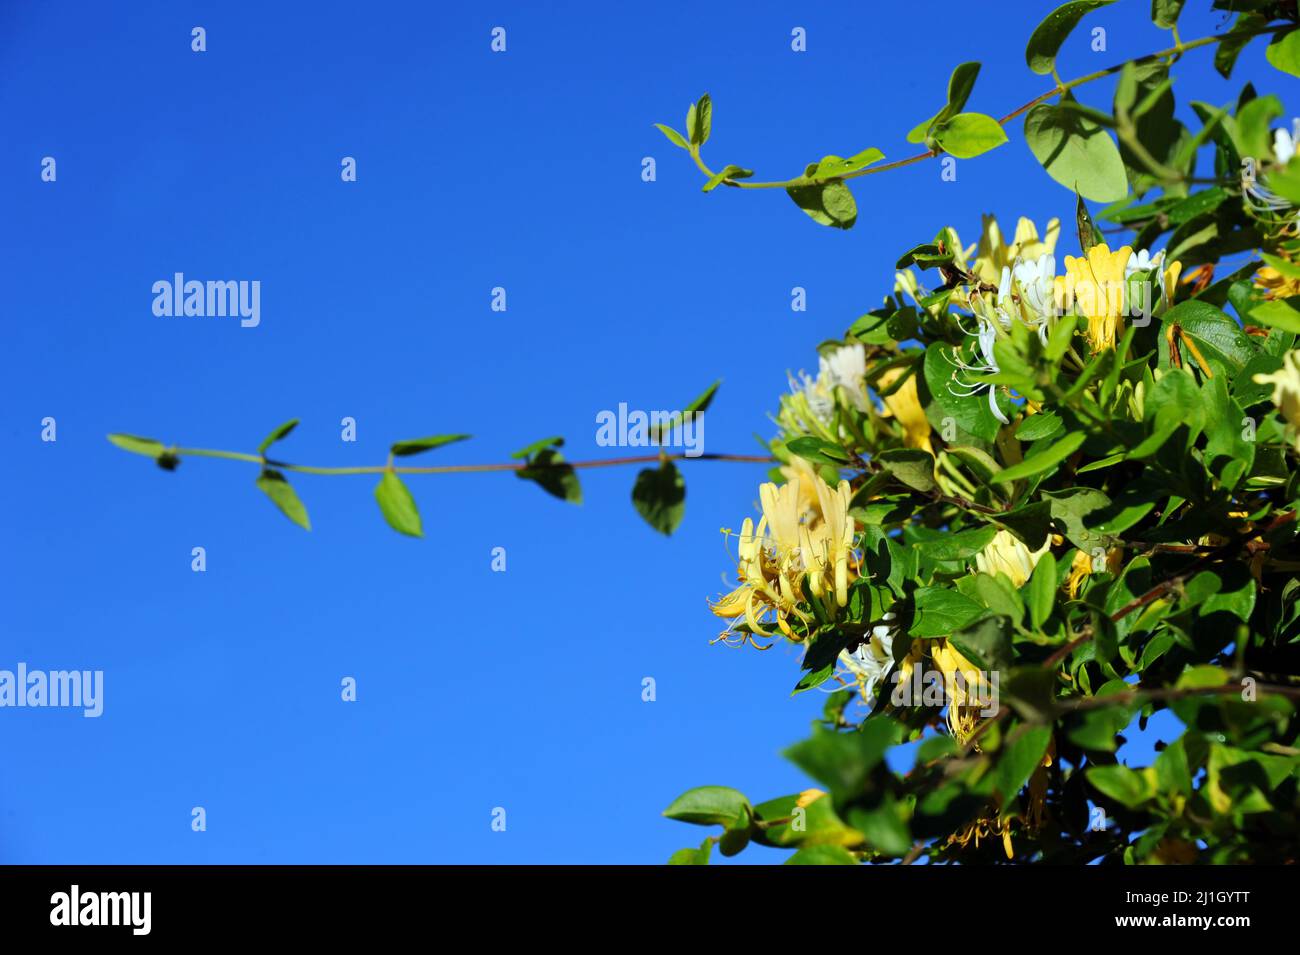 Blooming honeysuckle fine is framed by a vivid blue sky.  Blooms are yellow and white. Stock Photo